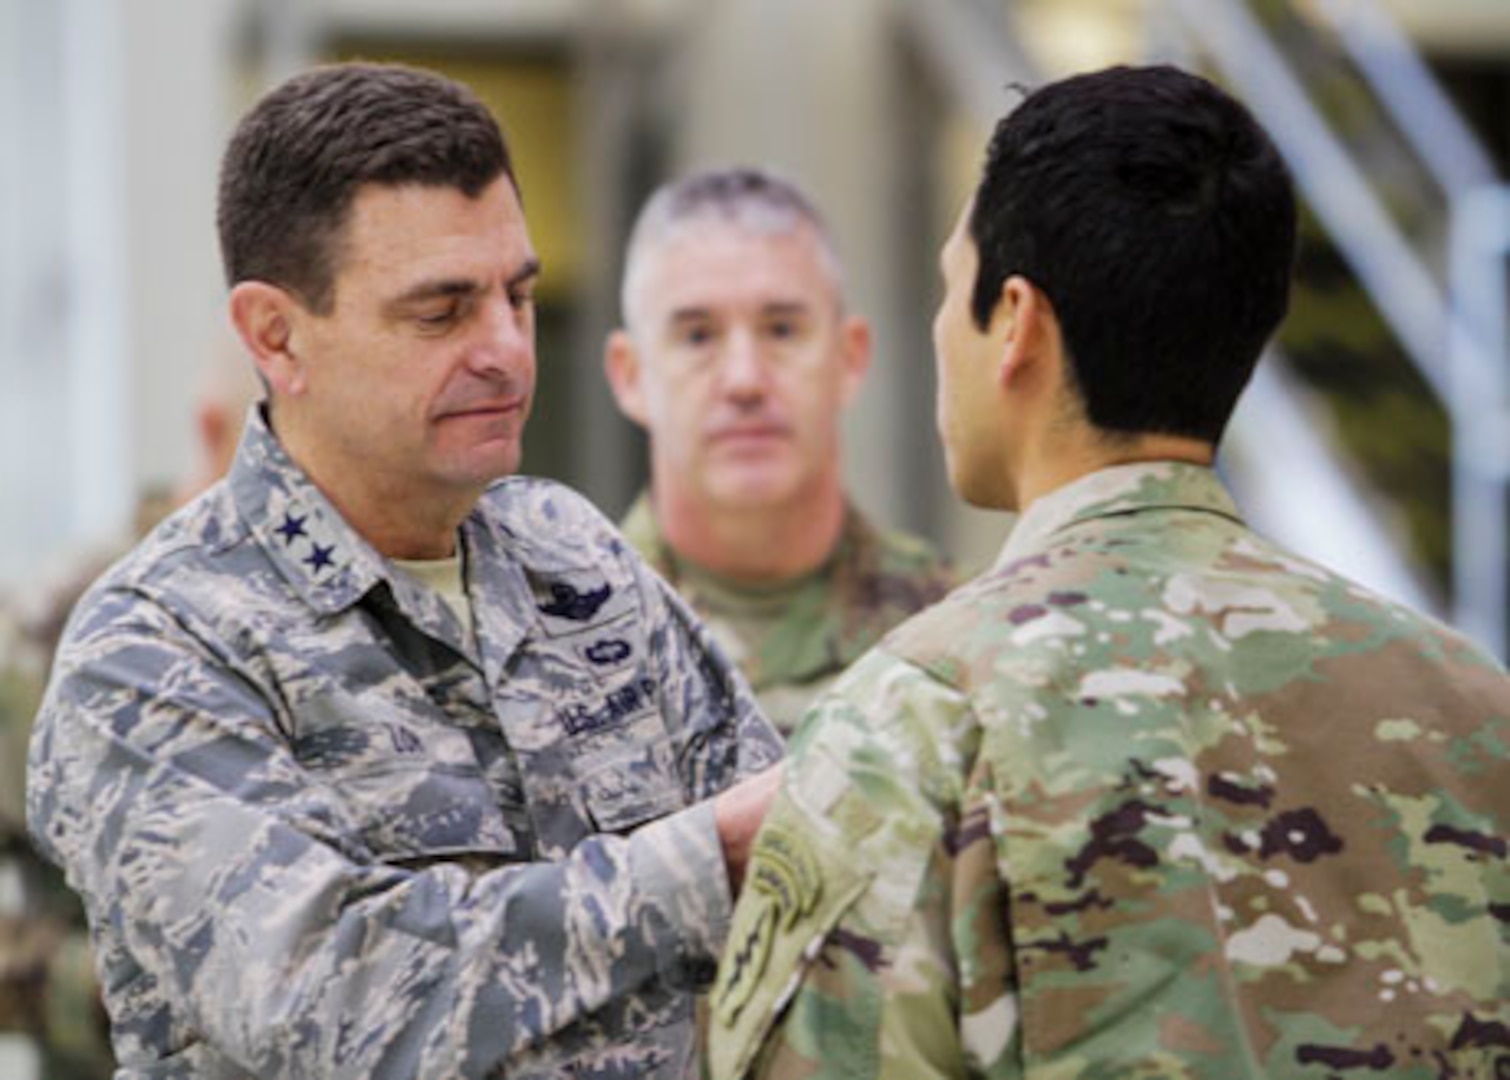 The Adjutant General of Colorado U.S. Air Force Maj. Gen. Mike Loh pins a medal on a 5th Battalion 19th Special Forces Group member at a Valor Ceremony, Feb. 10, 2018, following the units recent return.

Local and national leaders will honor Colorado Army National Guard Soldiers from Bravo Company, 5th Battalion, 19th Special Forces Group (Airborne) Feb. 10, with valor awards they earned while deployed last year in support of Operation Freedom’s Sentinel.

The unit returned from a six-month deployment to Afghanistan in October 2017.

The awards approved include seven Purple Heart Medals, 10 Bronze Star Medals with Valor, and eight Army Commendation Medals with Valor. One Silver Star Medal has also been approved, but the member is currently deployed in support of the warfight.

Many of the 59 valor awards submitted are still pending.

(U.S. Army National Guard Photo by Staff Sgt. Warren Wright)